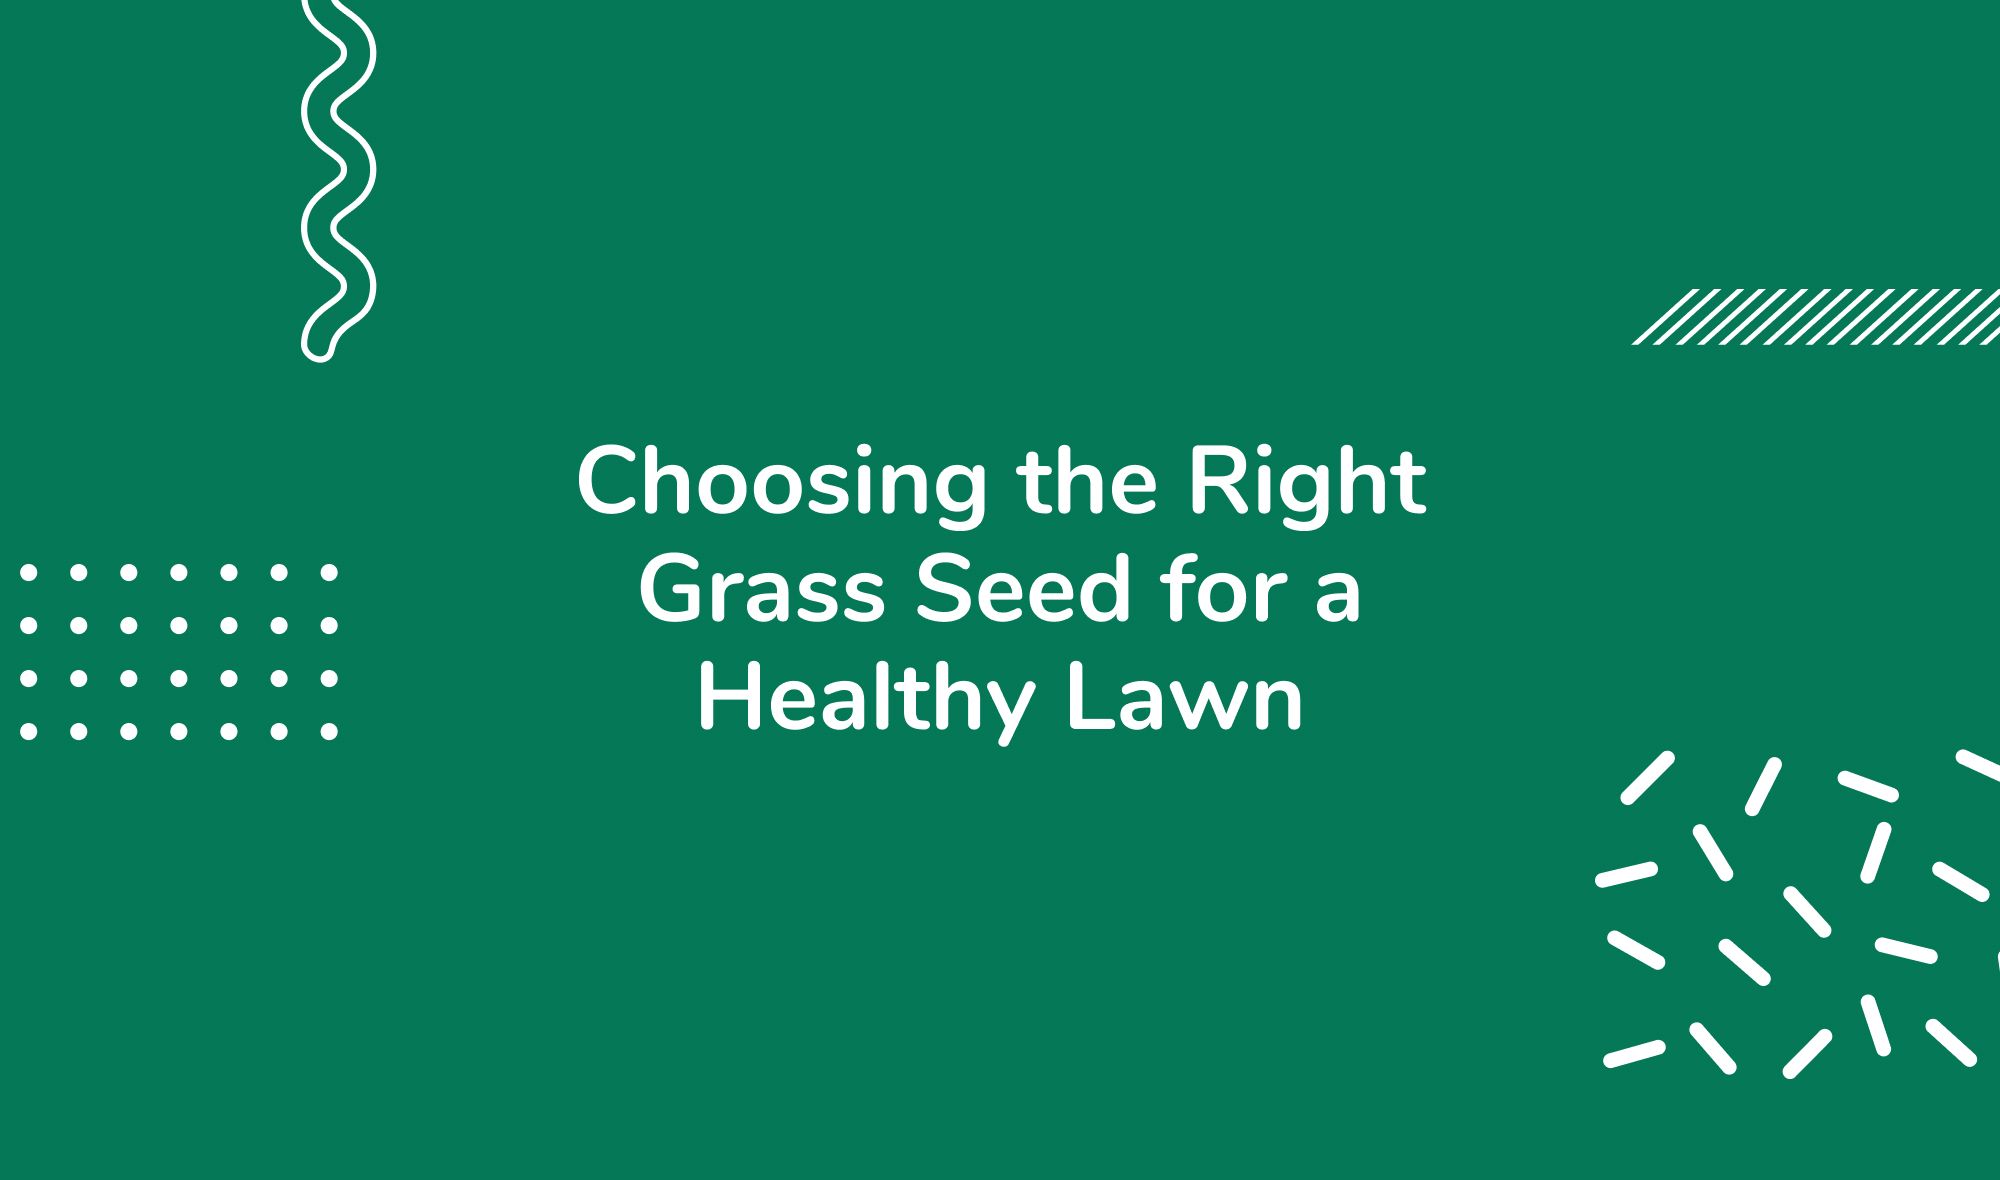 Choosing the Right Grass Seed for a Healthy Lawn